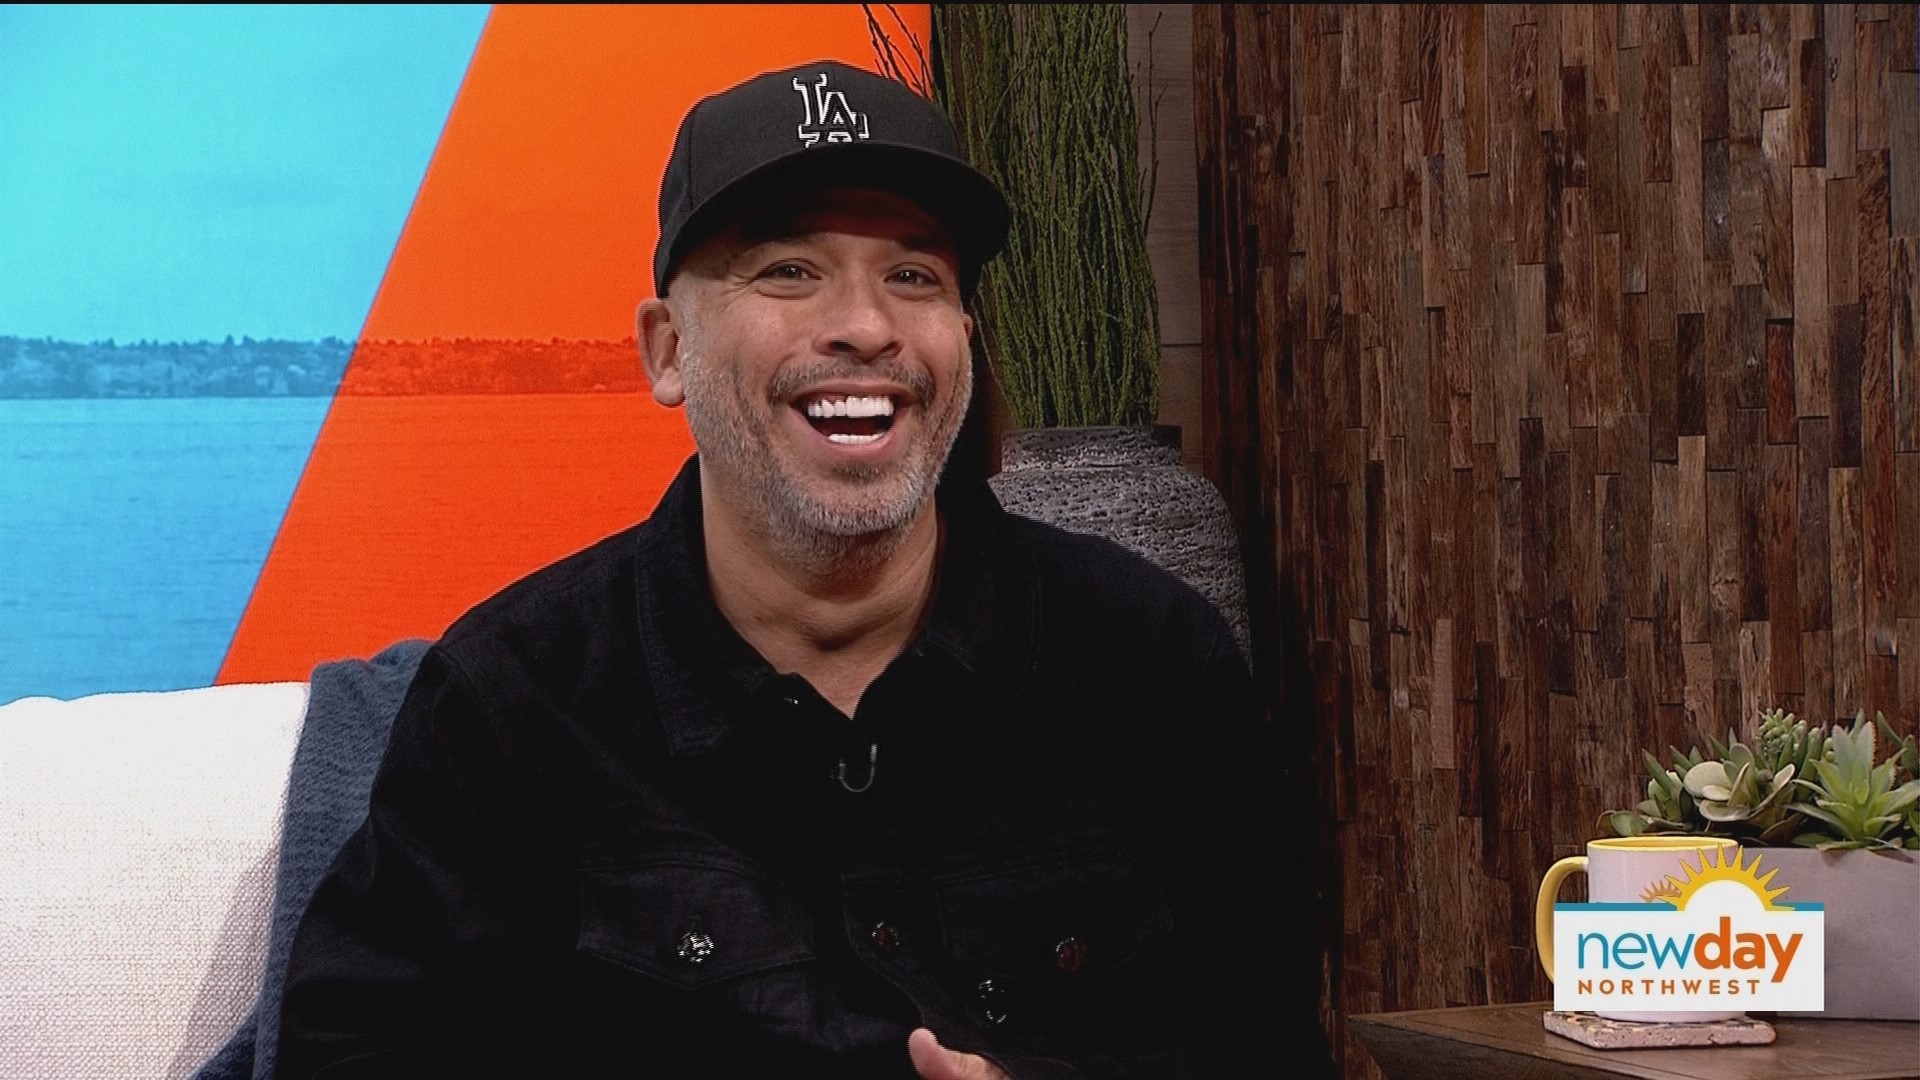 Jo Koy is on his "Just Kidding World Tour" and making a stop at New Day before a sold-out show in Snoqualmie.  Sponsored by Snoqualmie Casino